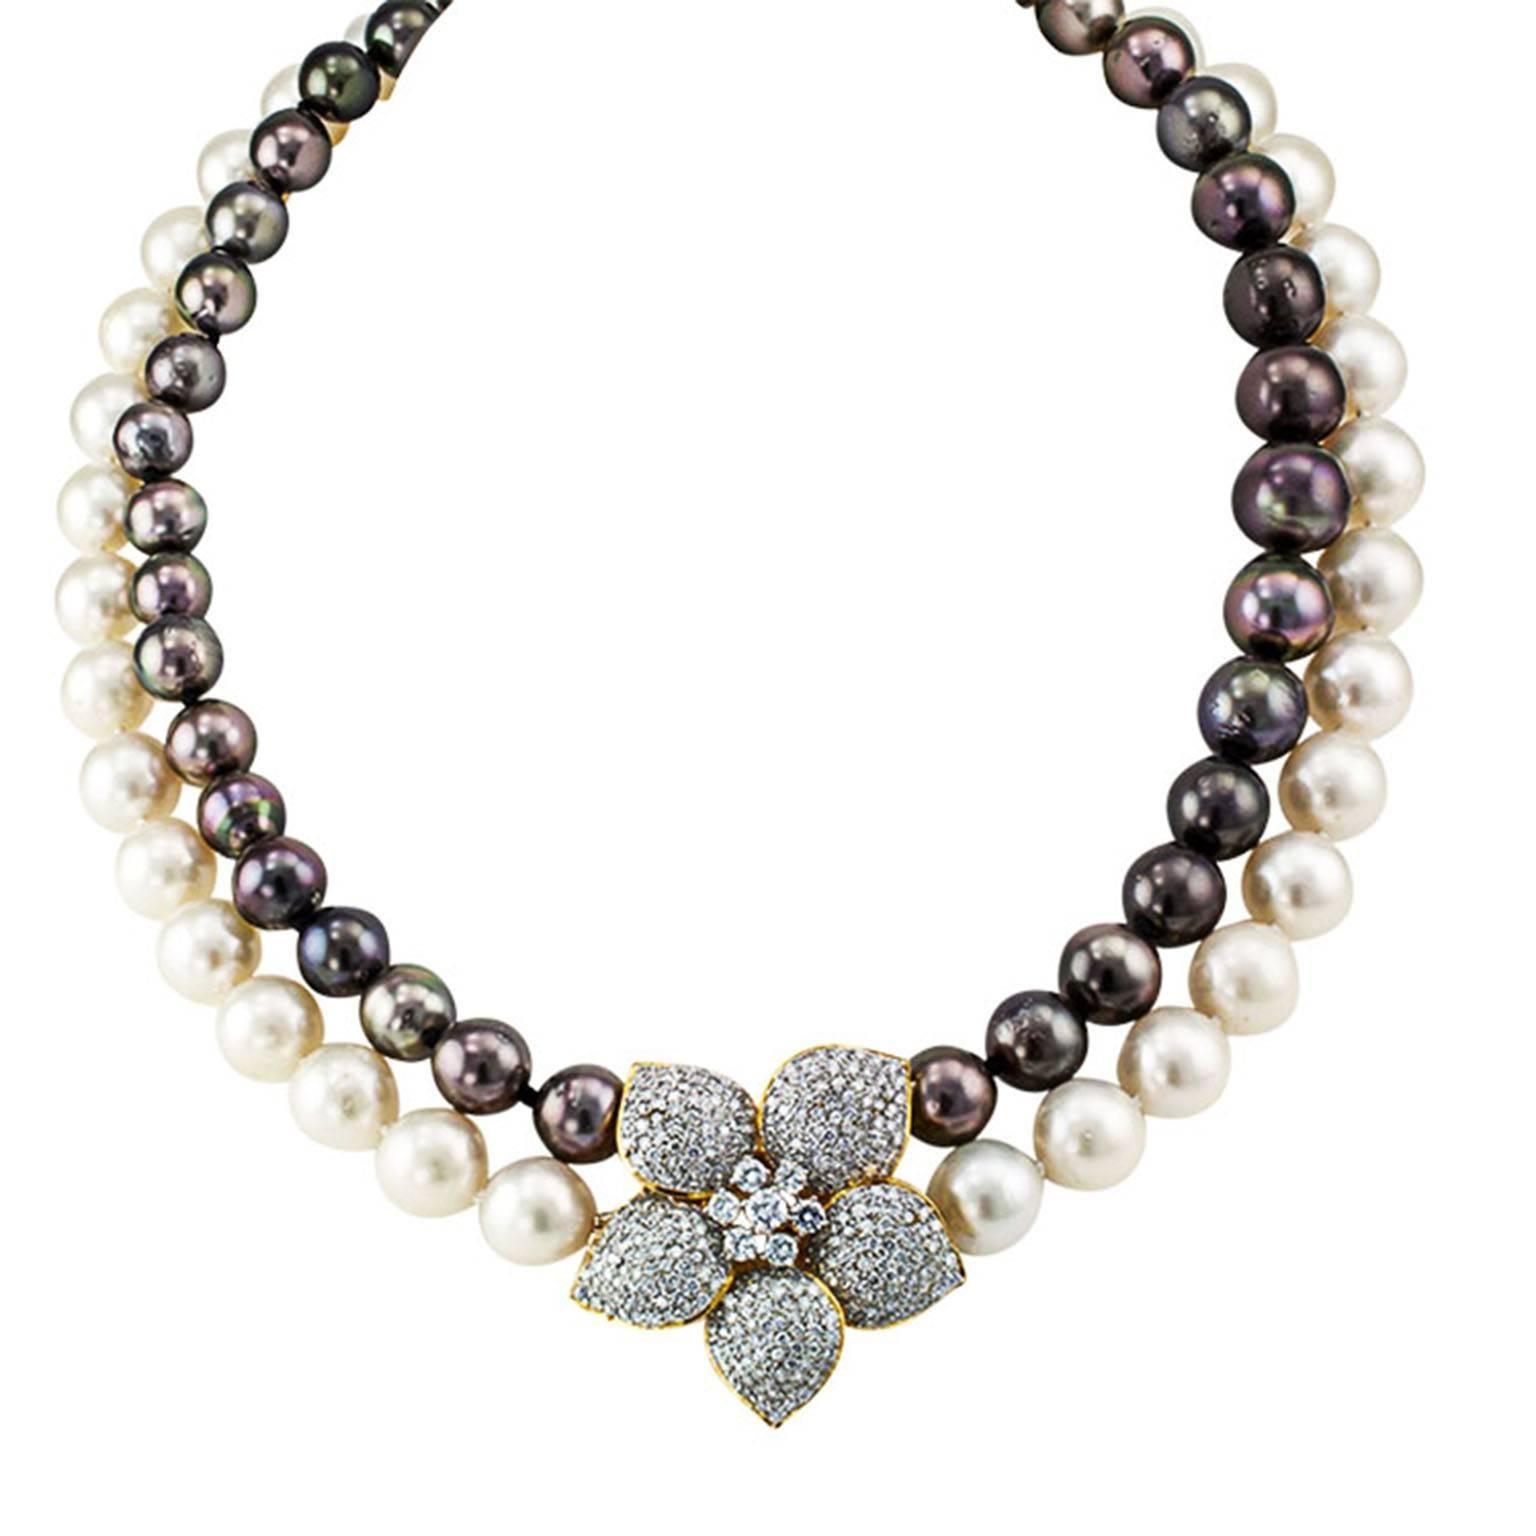 Tahitian and South Sea Pearl Necklace With Diamond Flower Clasp